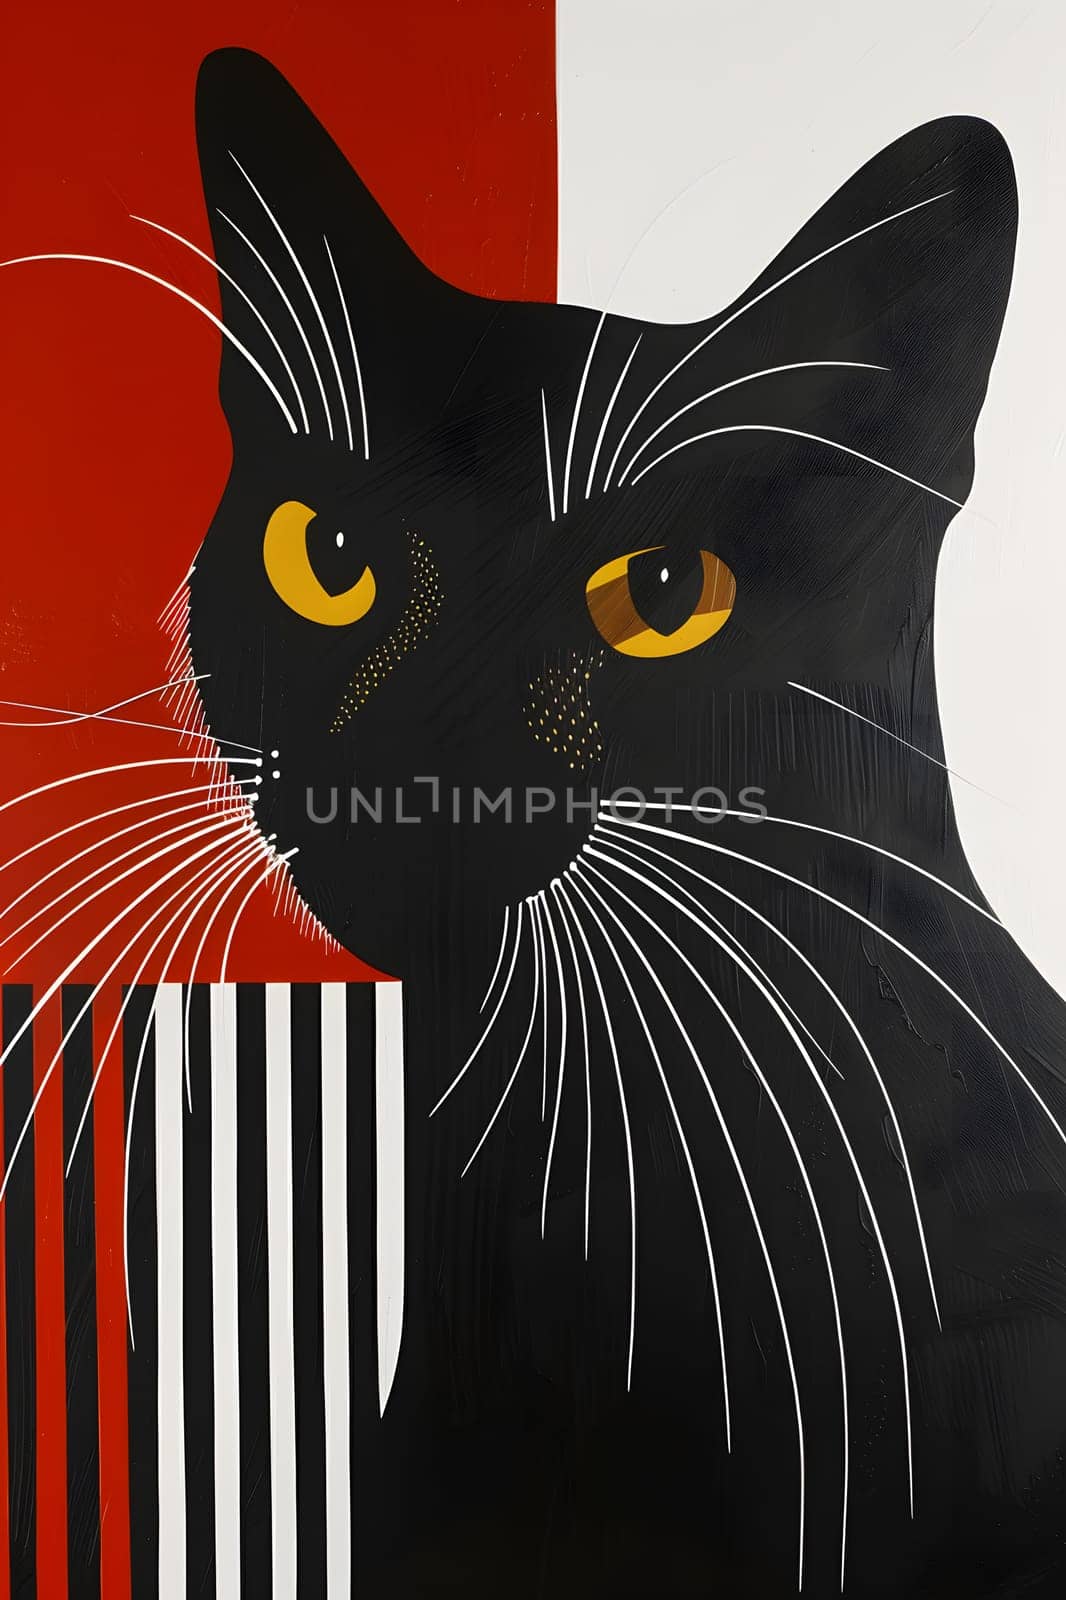 A domestic shorthaired black cat with yellow eyes, whiskers, and a snout is depicted in a closeup, artistic style on a red and white background